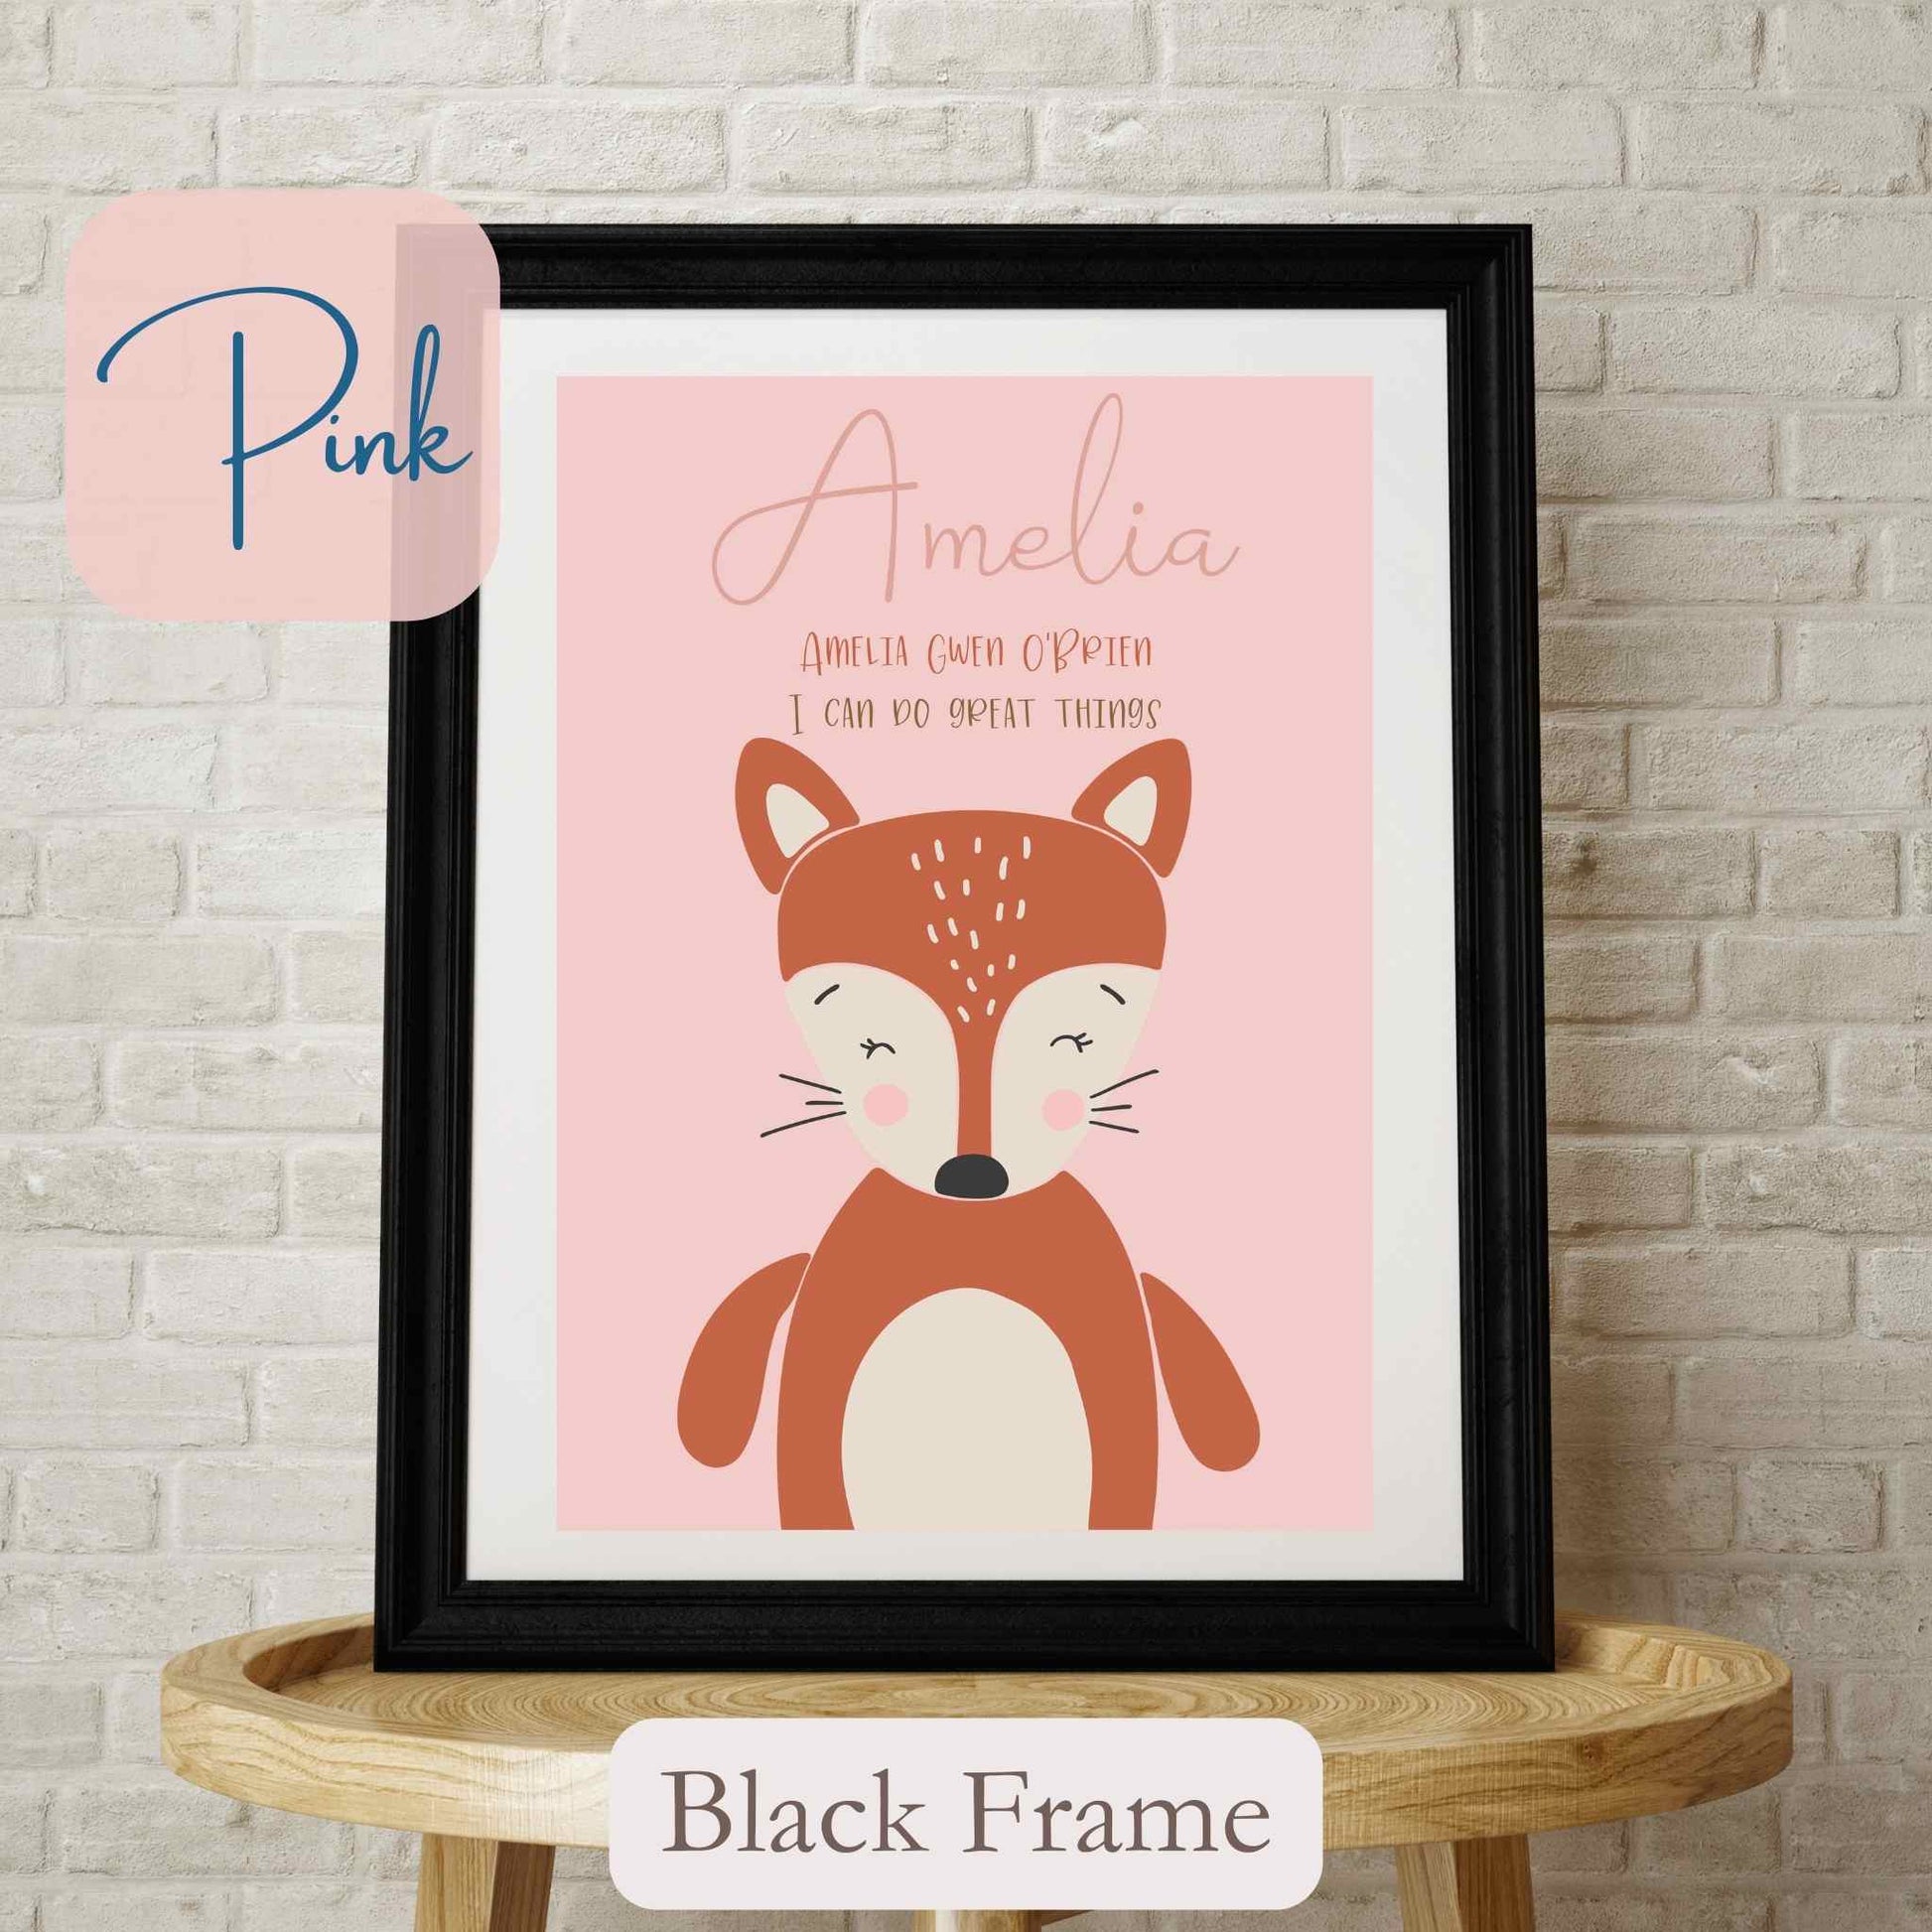 Personalised Framed Print with cute Fox, on pink coloured background with child’s name, and wording under name. Black Frame.